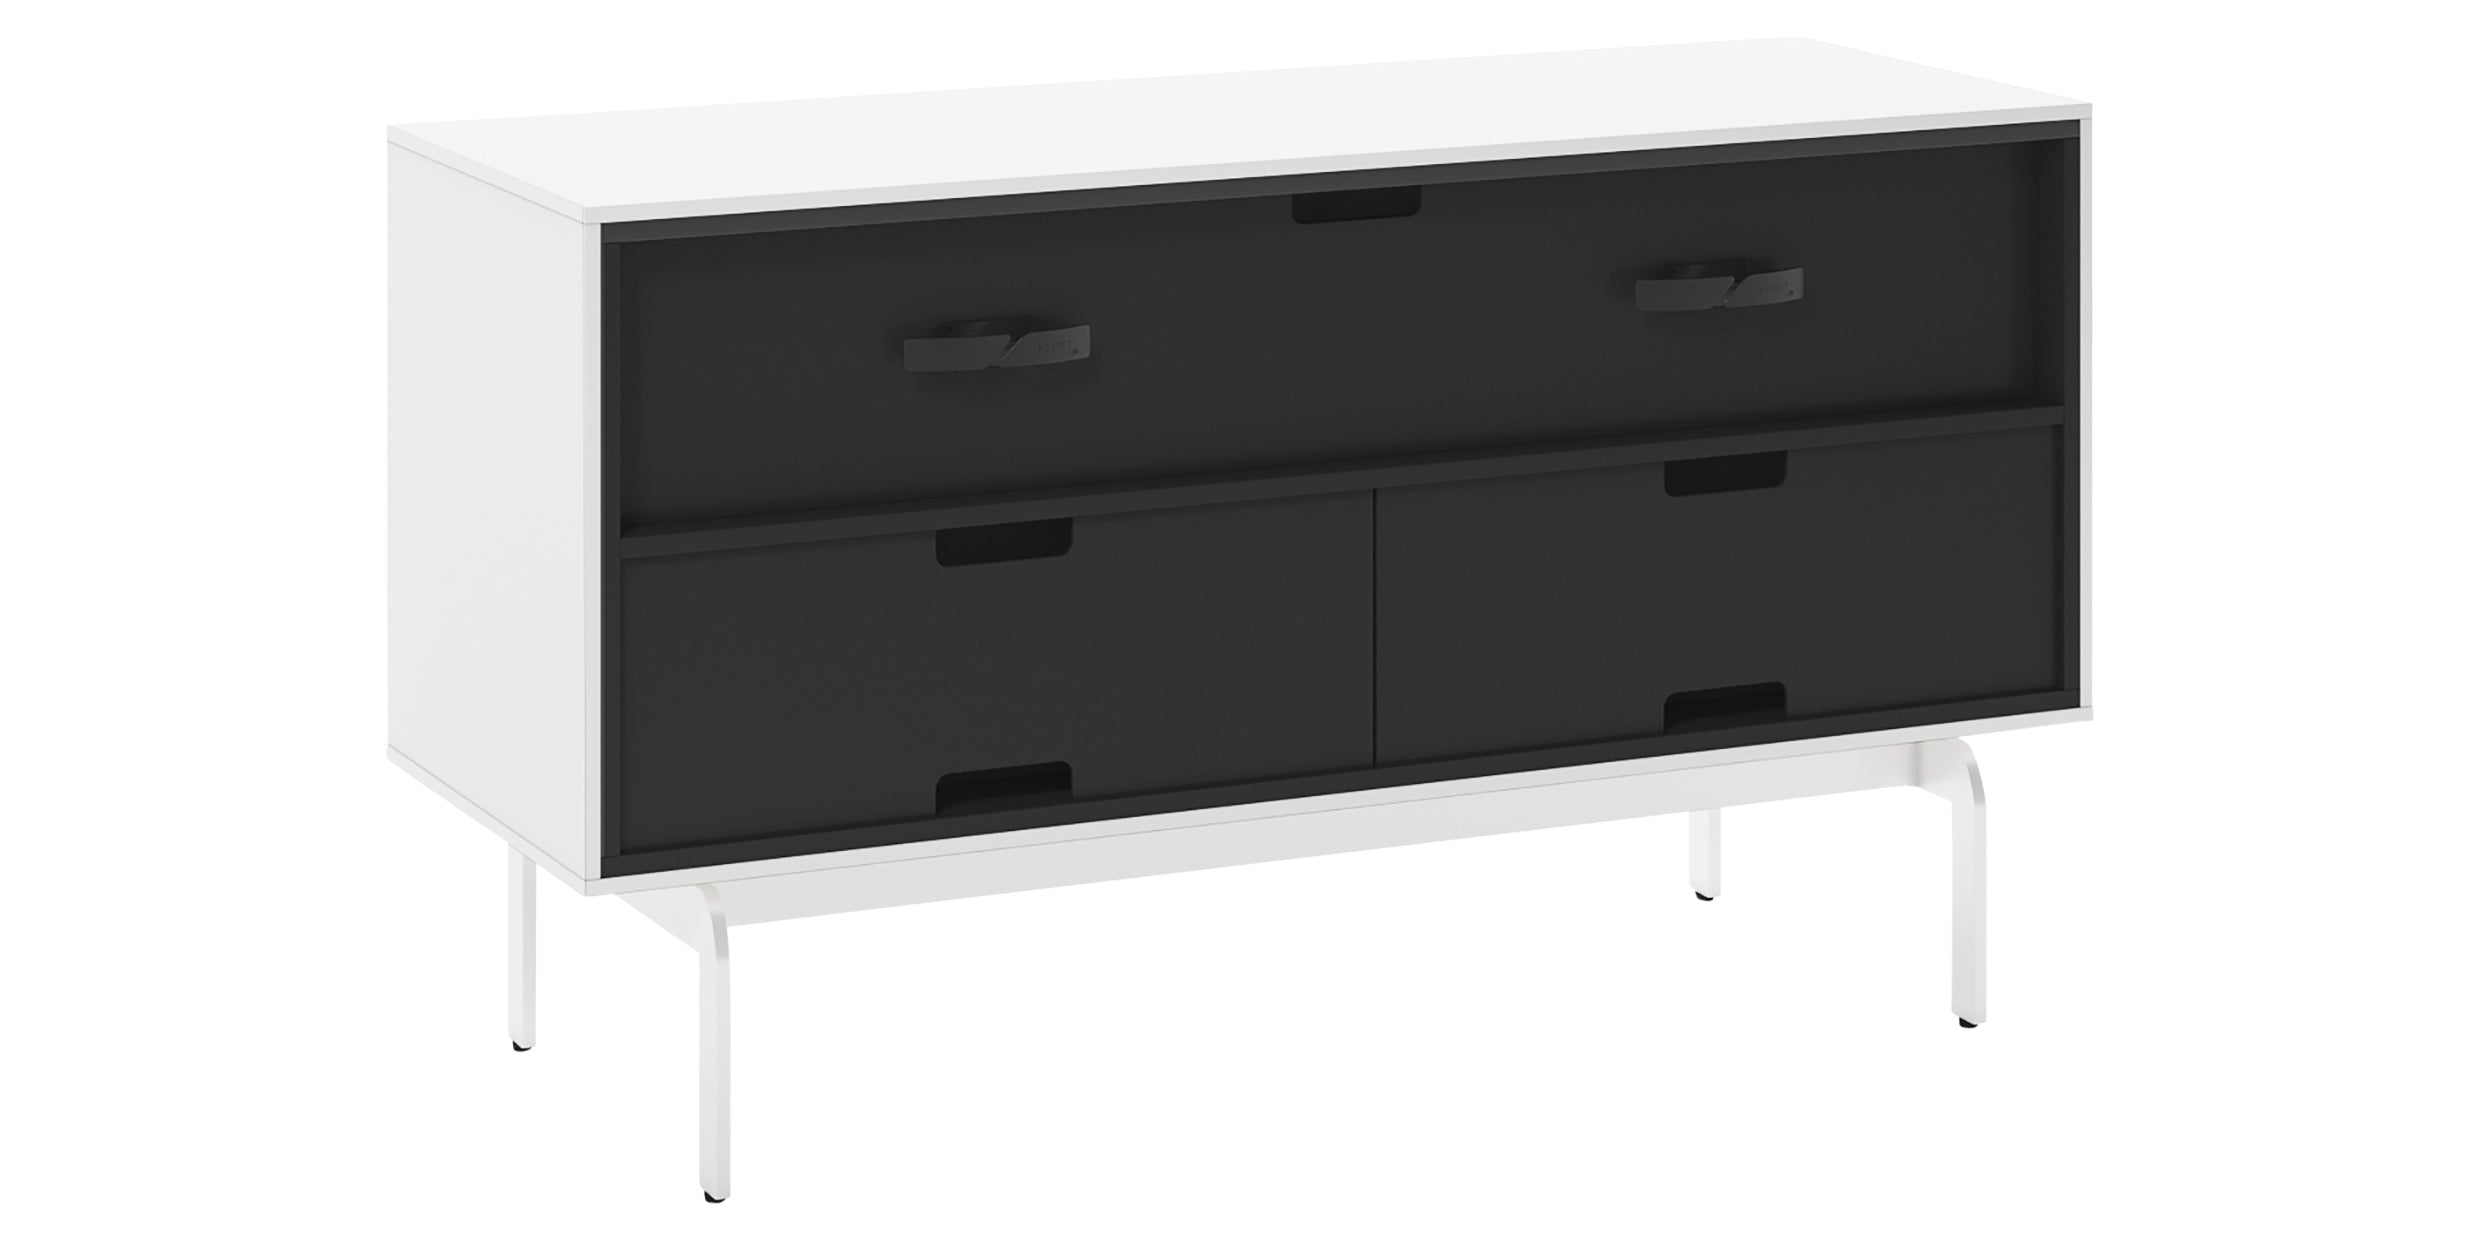 Satin White with Console Base | BDI Align 2 Door TV Stand | Valley Ridge Furniture